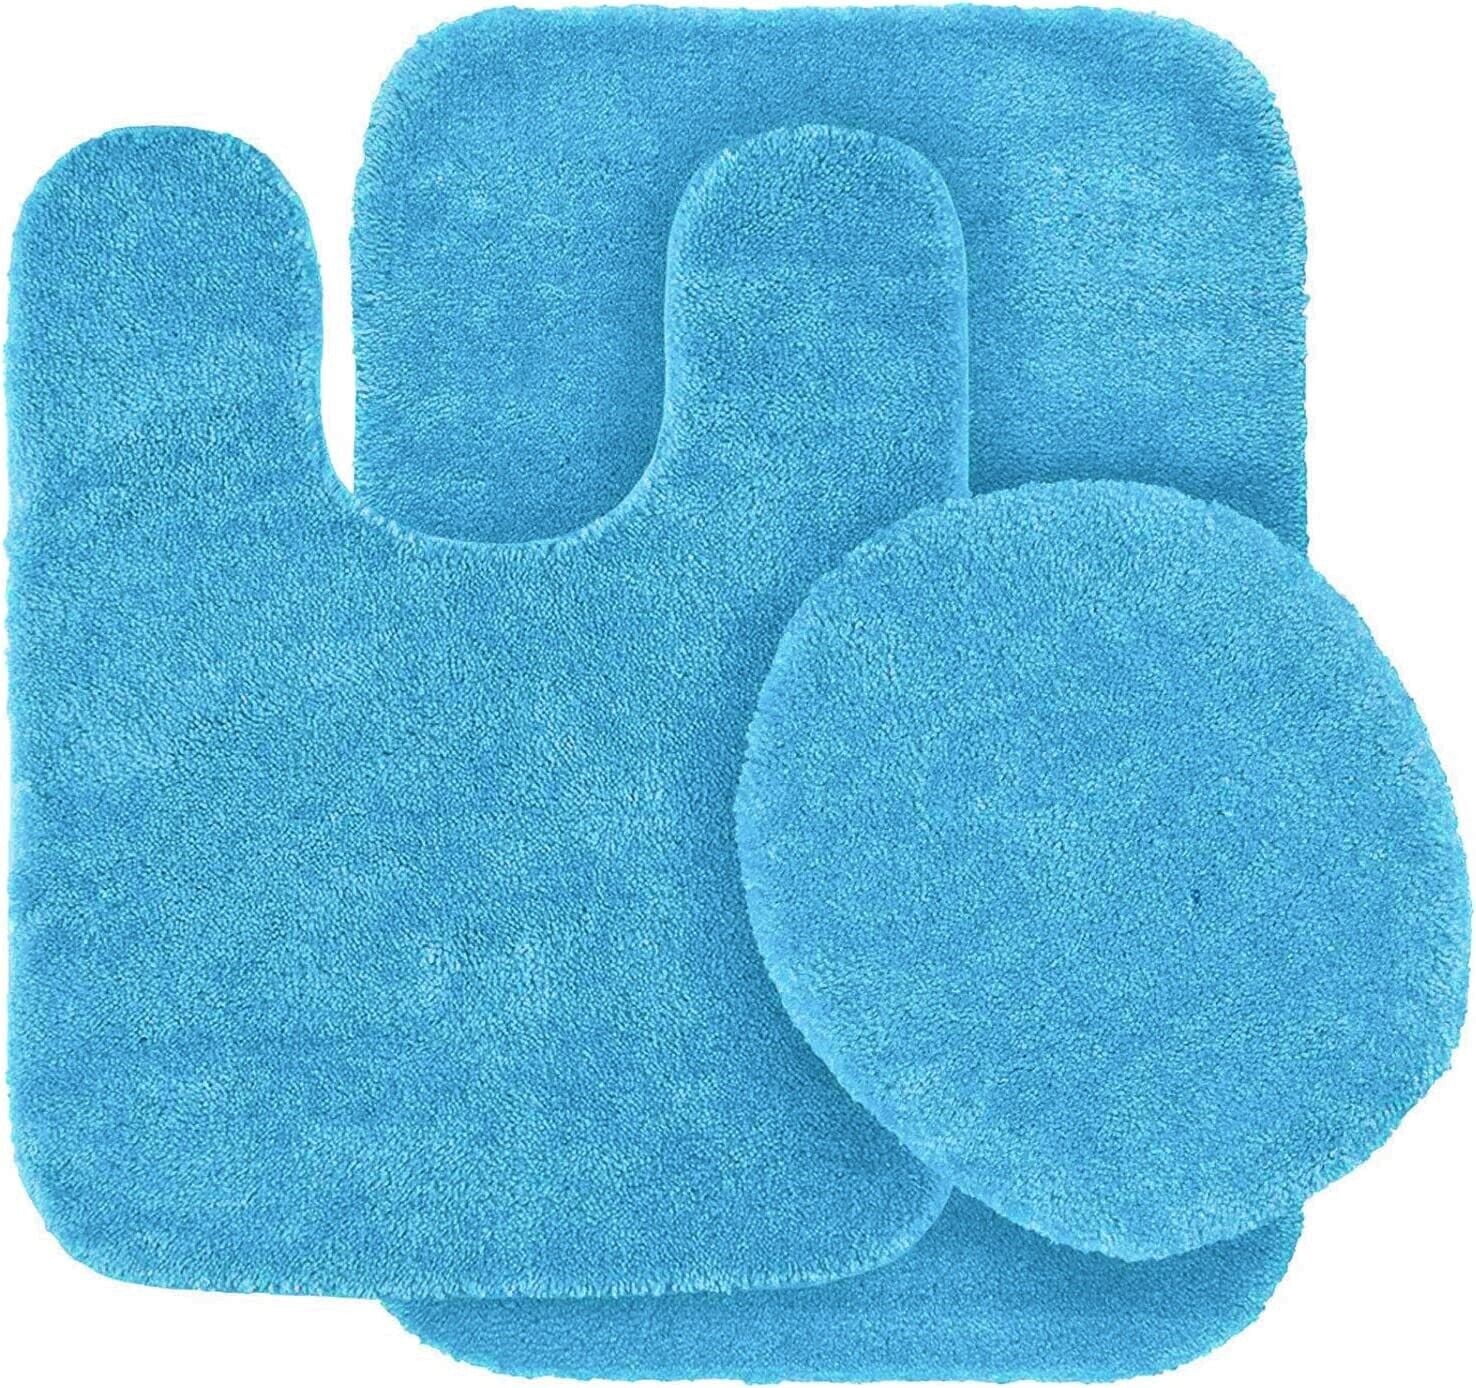 TREETONE Chenille Bath Mat 3 Piece Bathroom Rugs Set , 20x20 Inches U-Shape Contoured Toilet Mat & 20x32 Inches Rug & 1 Lid Cover ,Soft Water